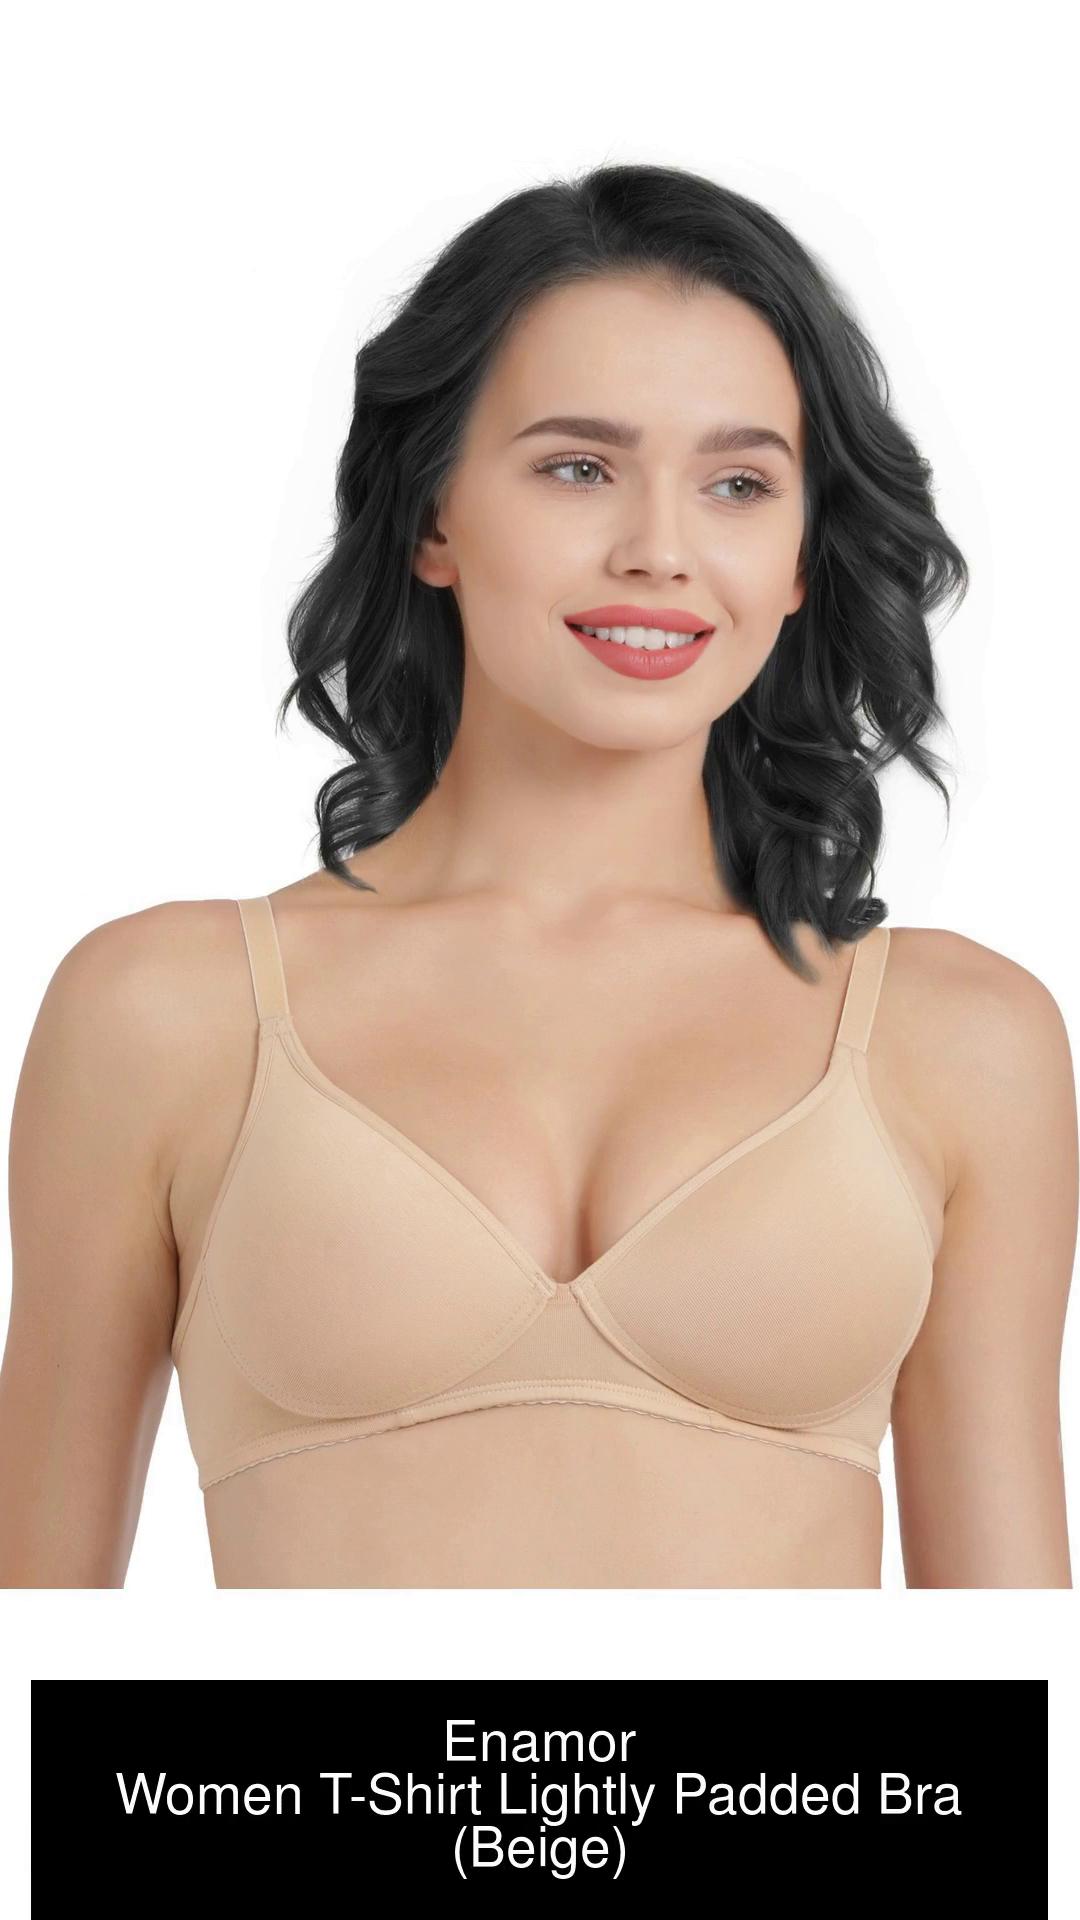 Enamor Wirefree A039 Perfect Coverage Cotton Women T-Shirt Lightly Padded  Bra - Buy SKIN Enamor Wirefree A039 Perfect Coverage Cotton Women T-Shirt  Lightly Padded Bra Online at Best Prices in India